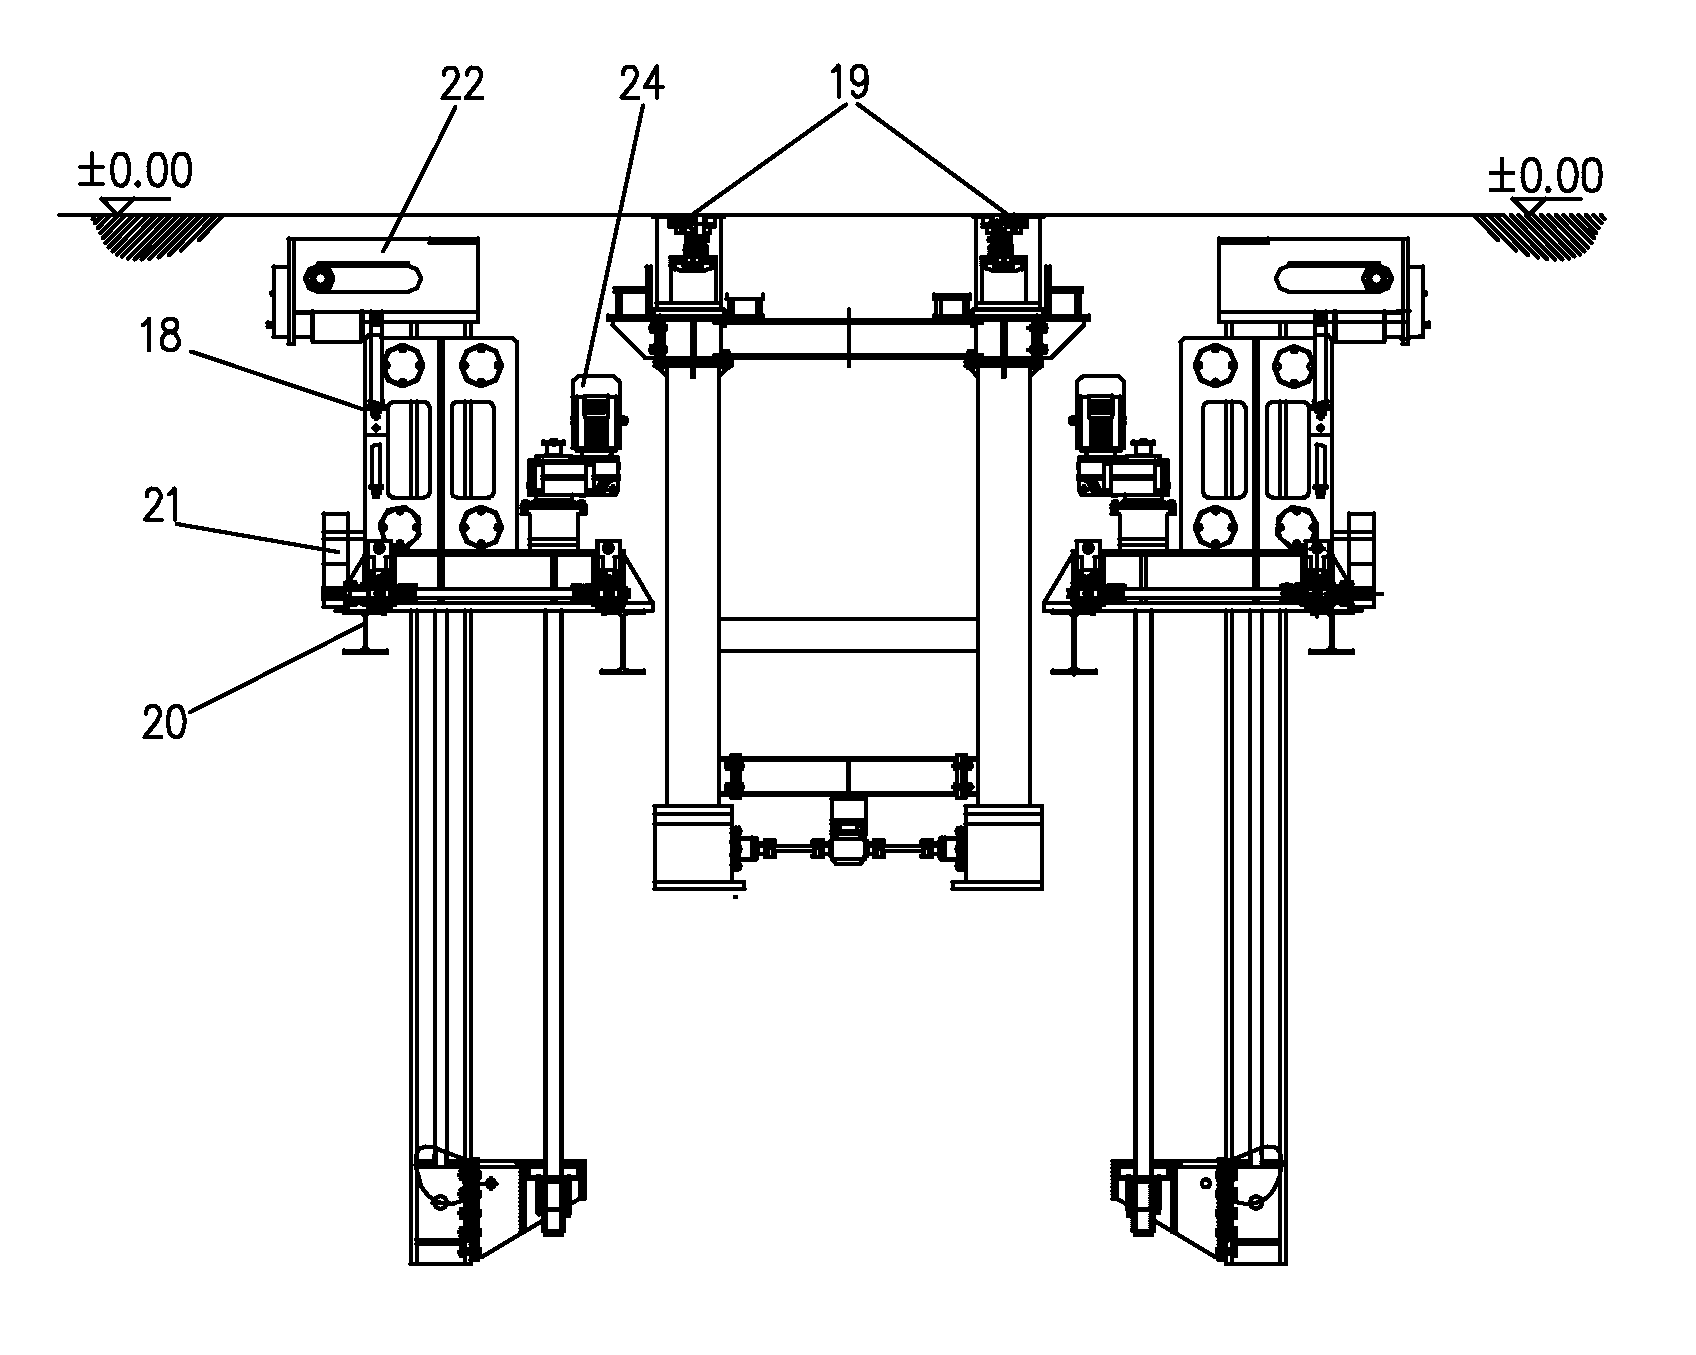 Under-floor lifting jack for high-speed electric multiple unit trainset